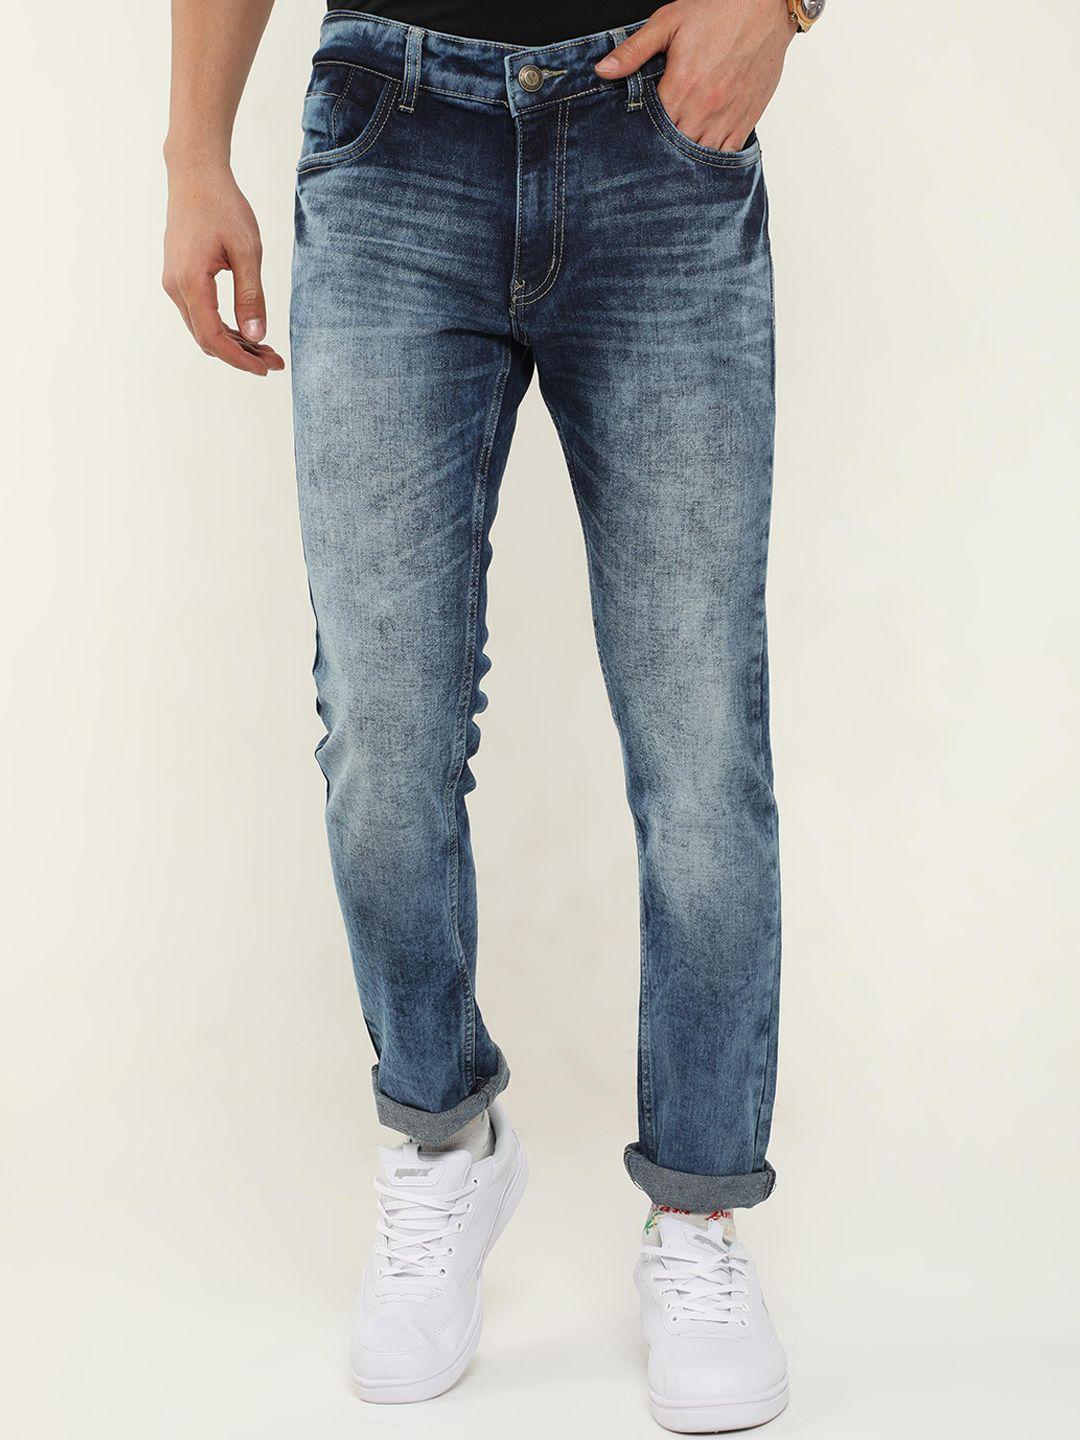 vudu-men-navy-blue-narrow-tapered-fit-heavy-fade-stretchable-jeans